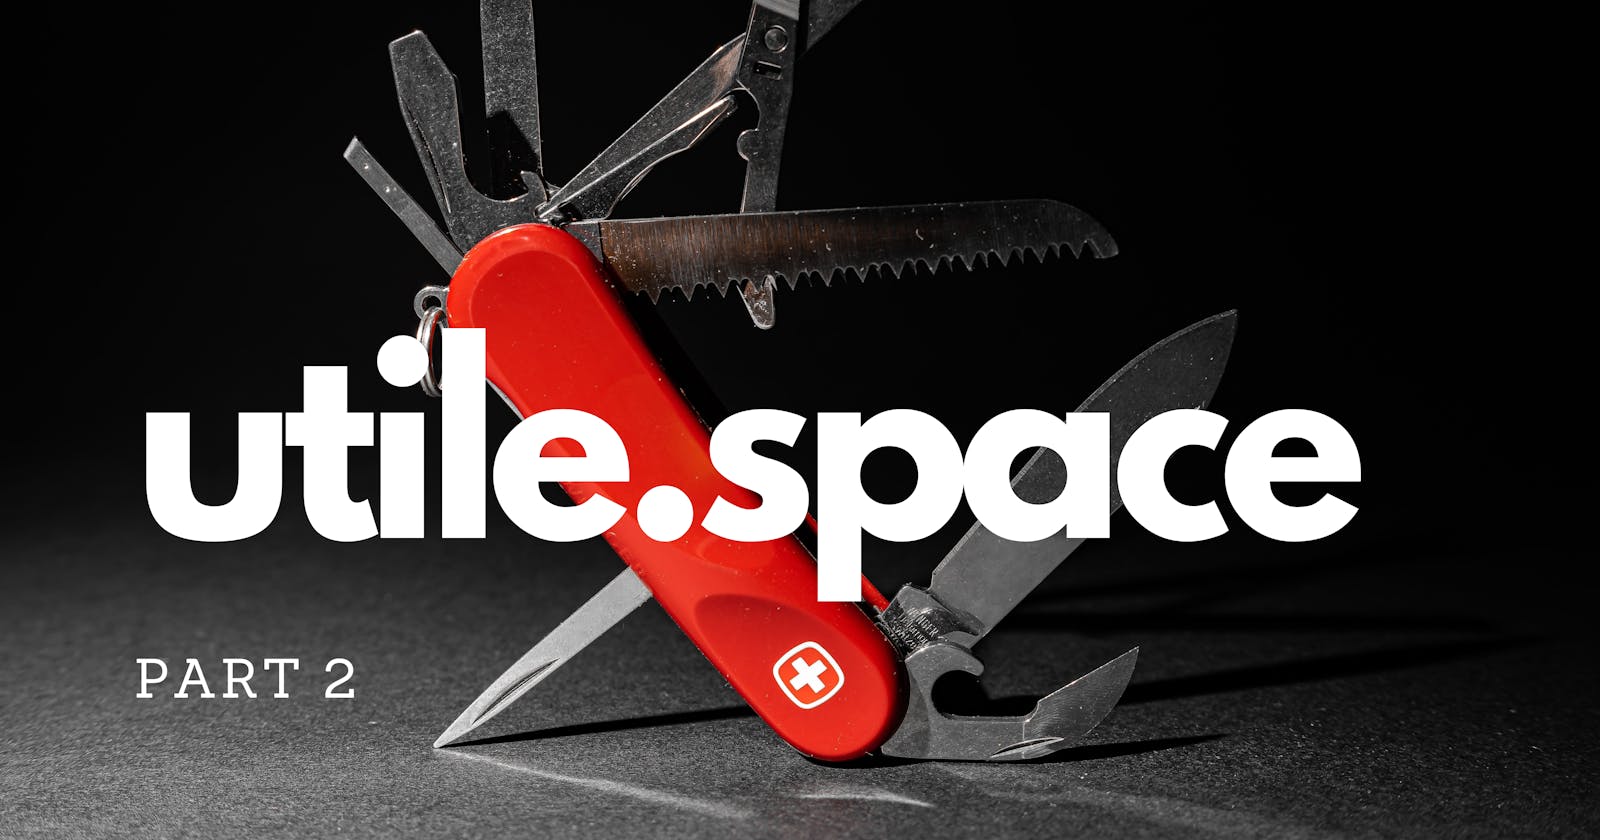 Building my personal Swiss Army Knife services, Part 2